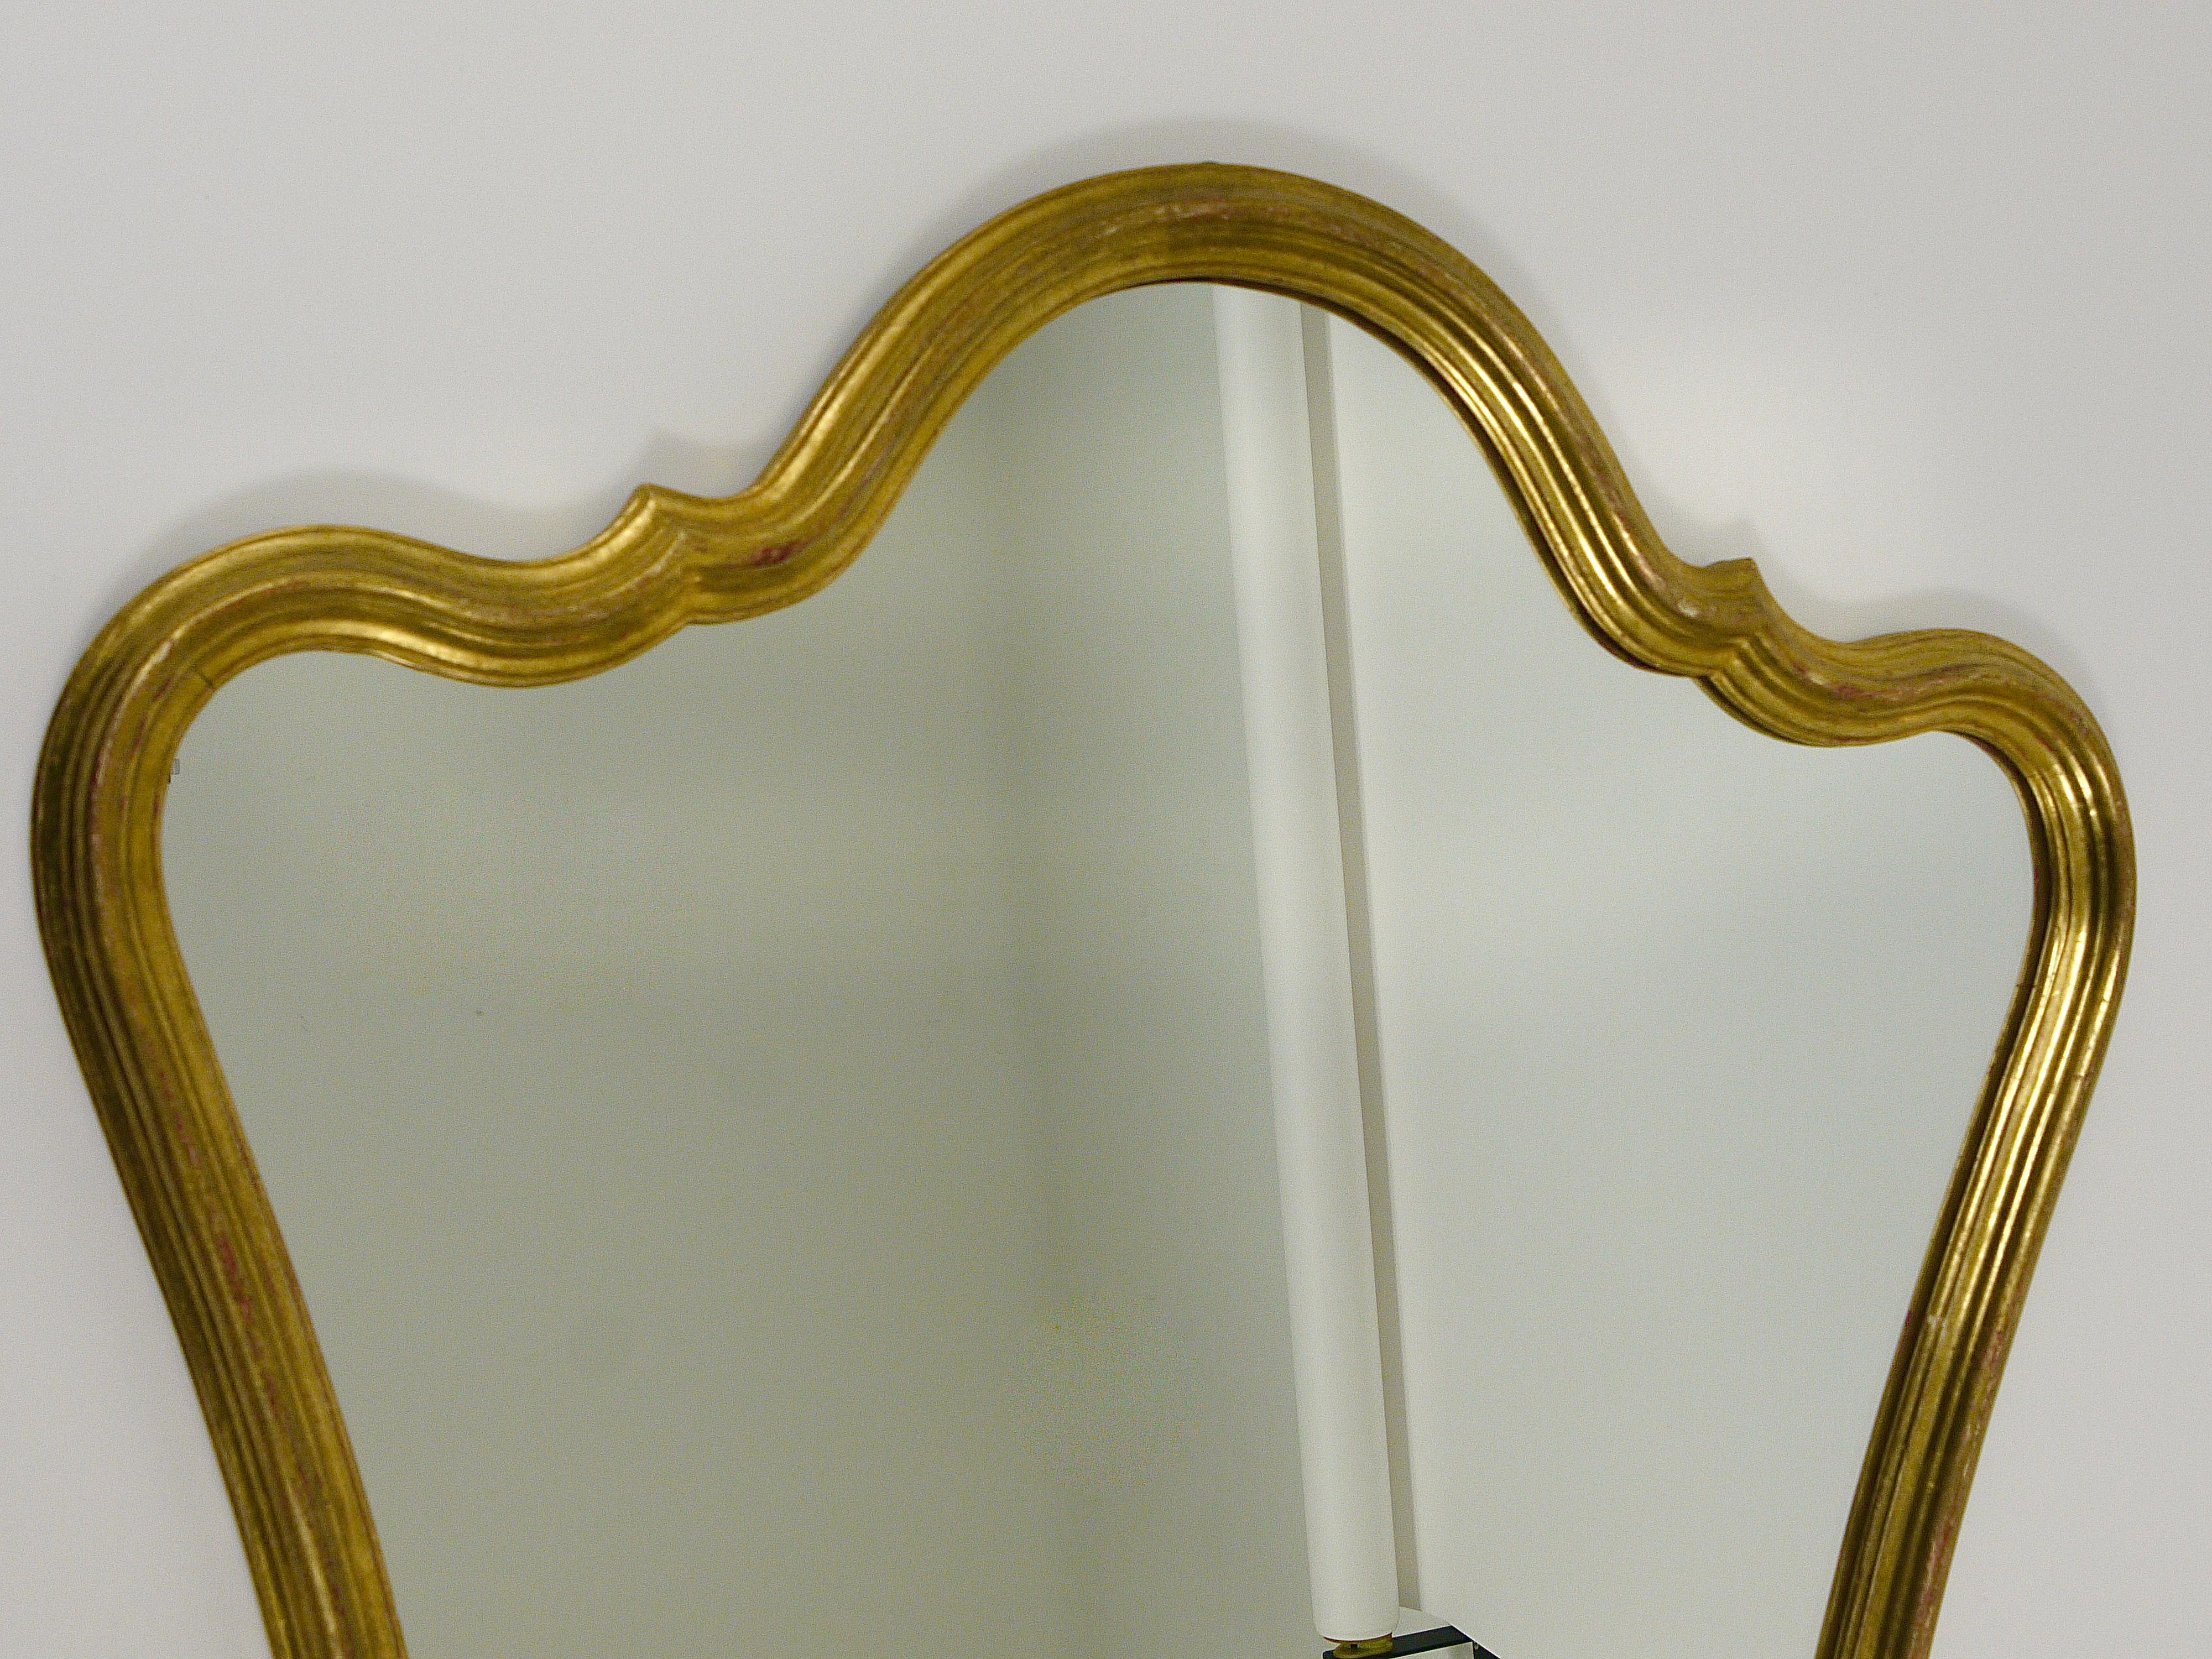 Chelini Firenze Curved Gilt Wood Mid-Century Wall Mirror, Italy, 1950s For Sale 3